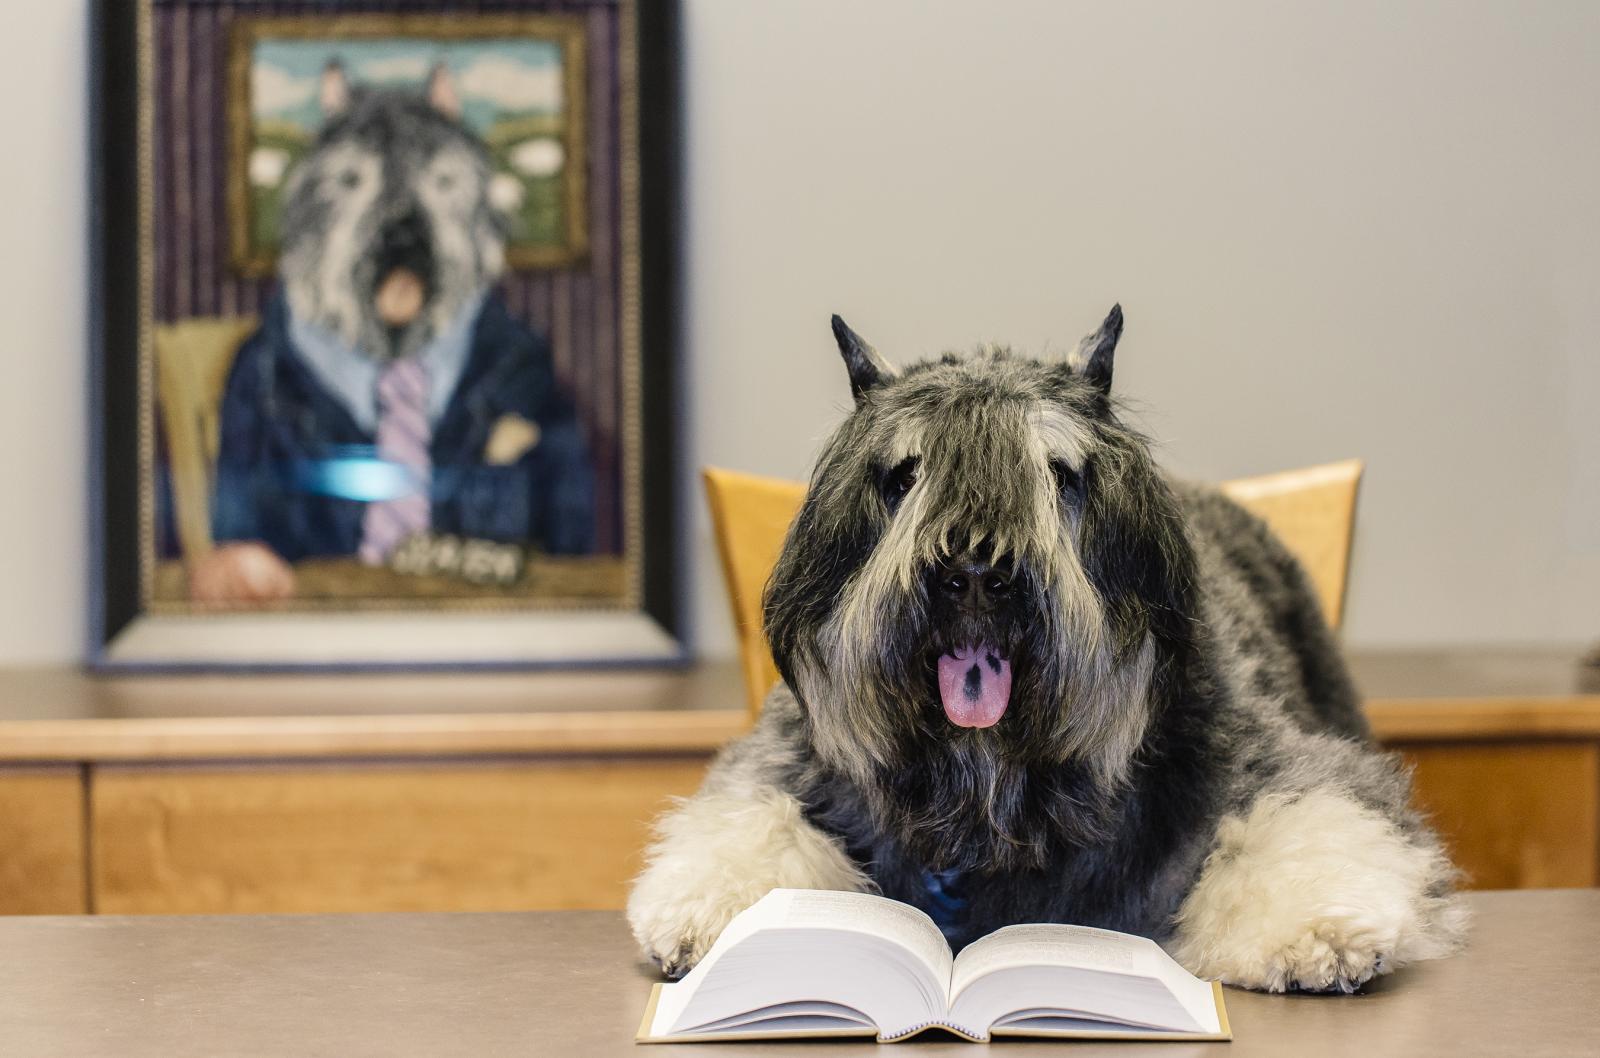 A true law dog, Slater, a shaggy dog wearing a necktie sits at desk in front of an open legal book. Behind Slater is a painting that shows the same dog in a full suit. While the photo is intended to be fun and whimsical, i